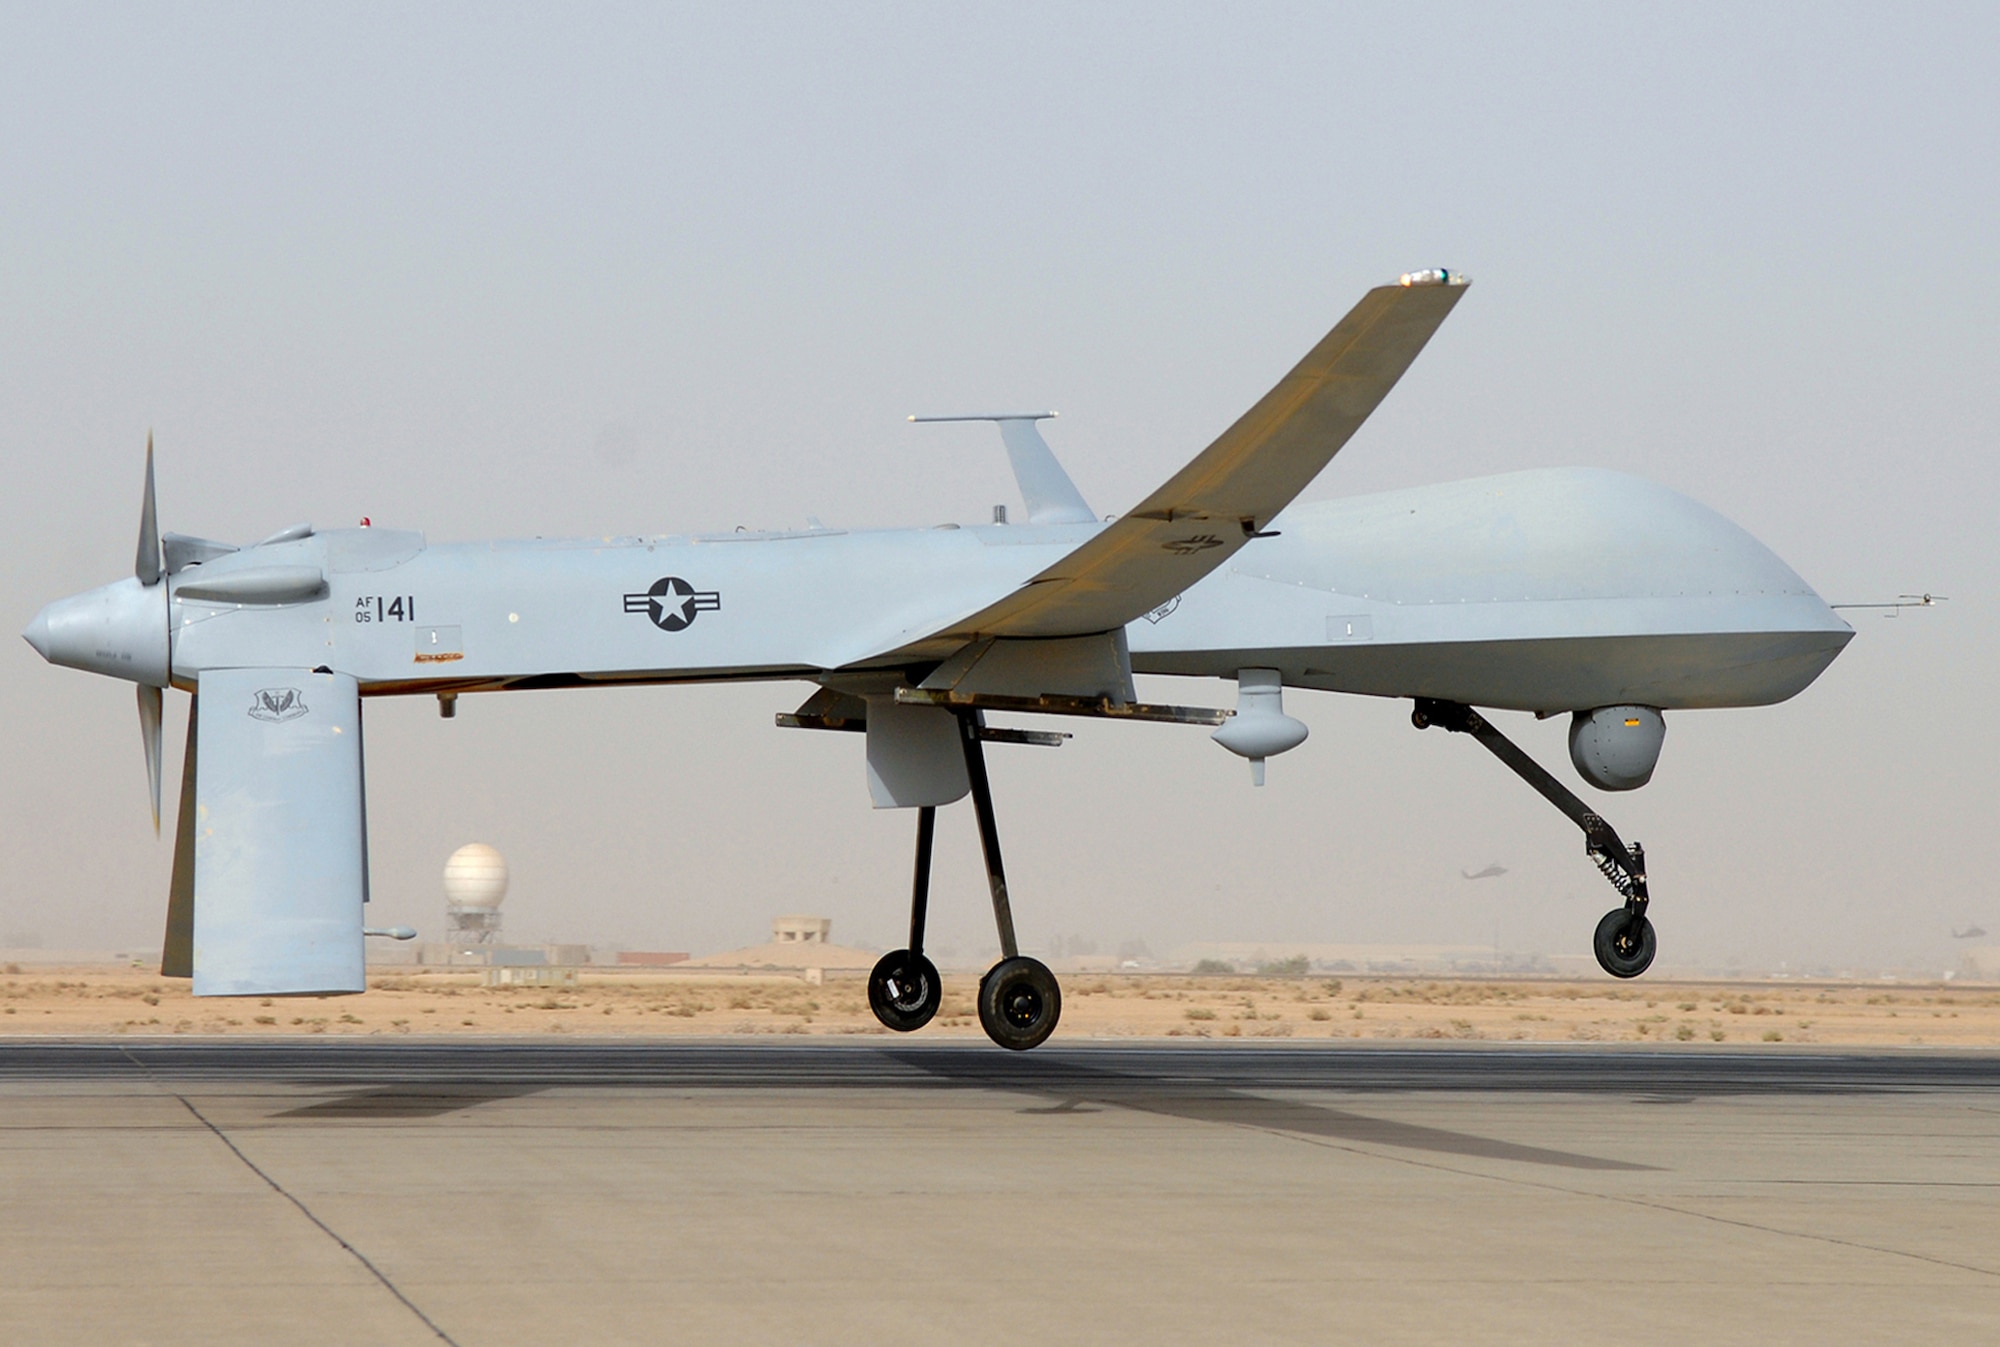 An MQ-1 Predator unmanned aircraft prepares for takeoff in support of operations in Southwest Asia. Air Force officials announced Eglin Air Force Base complex in Florida as a candidate for an Air Force Reserve Command MQ-1 Remote Split-Operations squadron. (U.S. Air Force photo/Senior Airman Julianne Showalter) 
